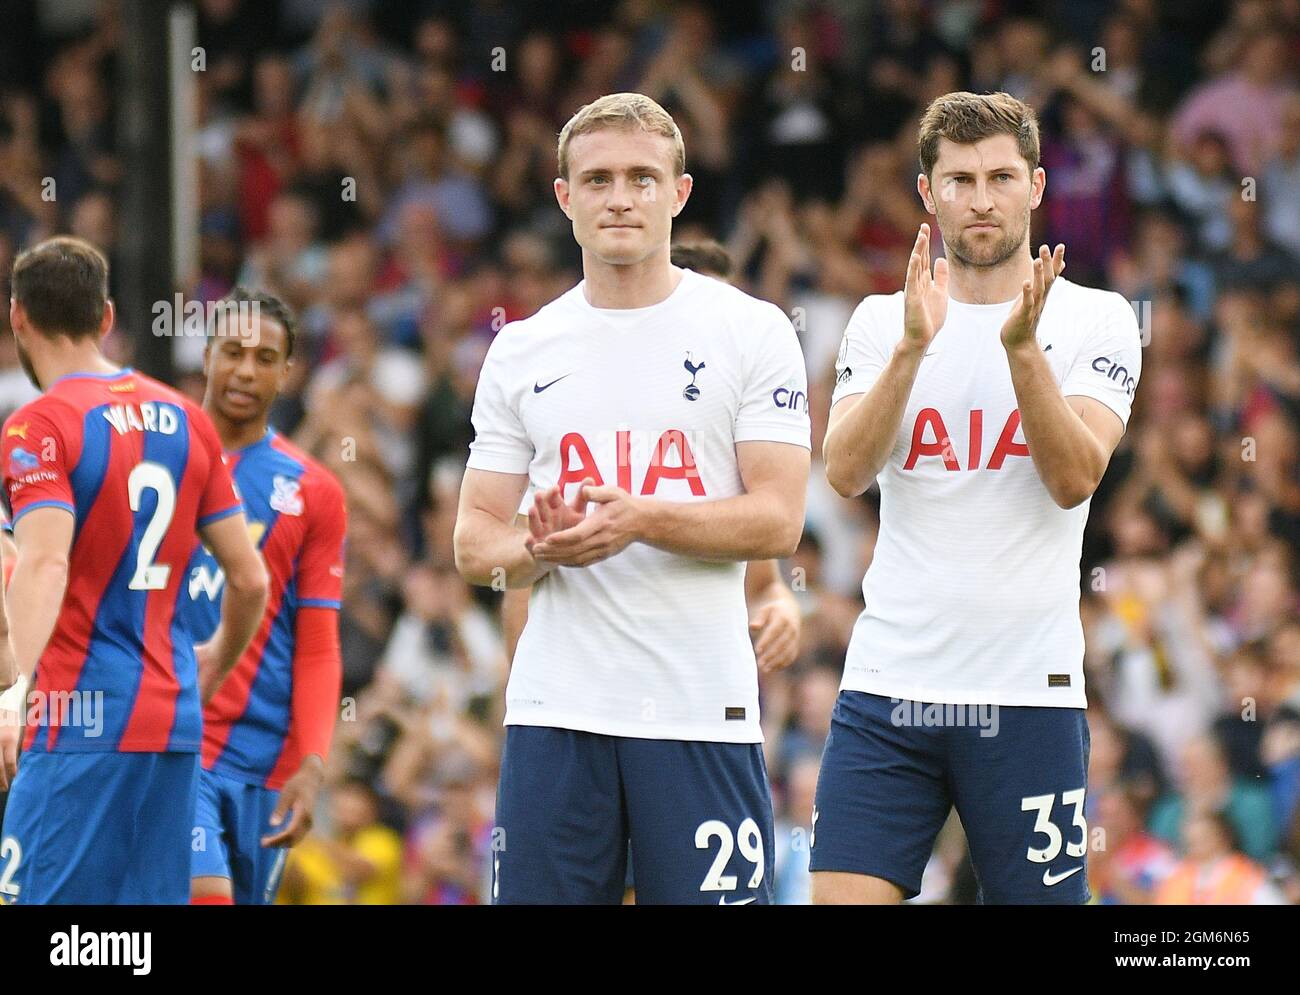 LONDON, ENGLAND - SEPTEMBER 11, 2021: Oliver William Skipp of Tottenham and Benjamin Thomas Davies of Tottenham salute the fans after the 2021/22 Premier League matchweek 4 game between Crystal Palace FC and Tottenham Hotspur FC at Selhurst Park. Copyright: Cosmin Iftode/Picstaff Stock Photo